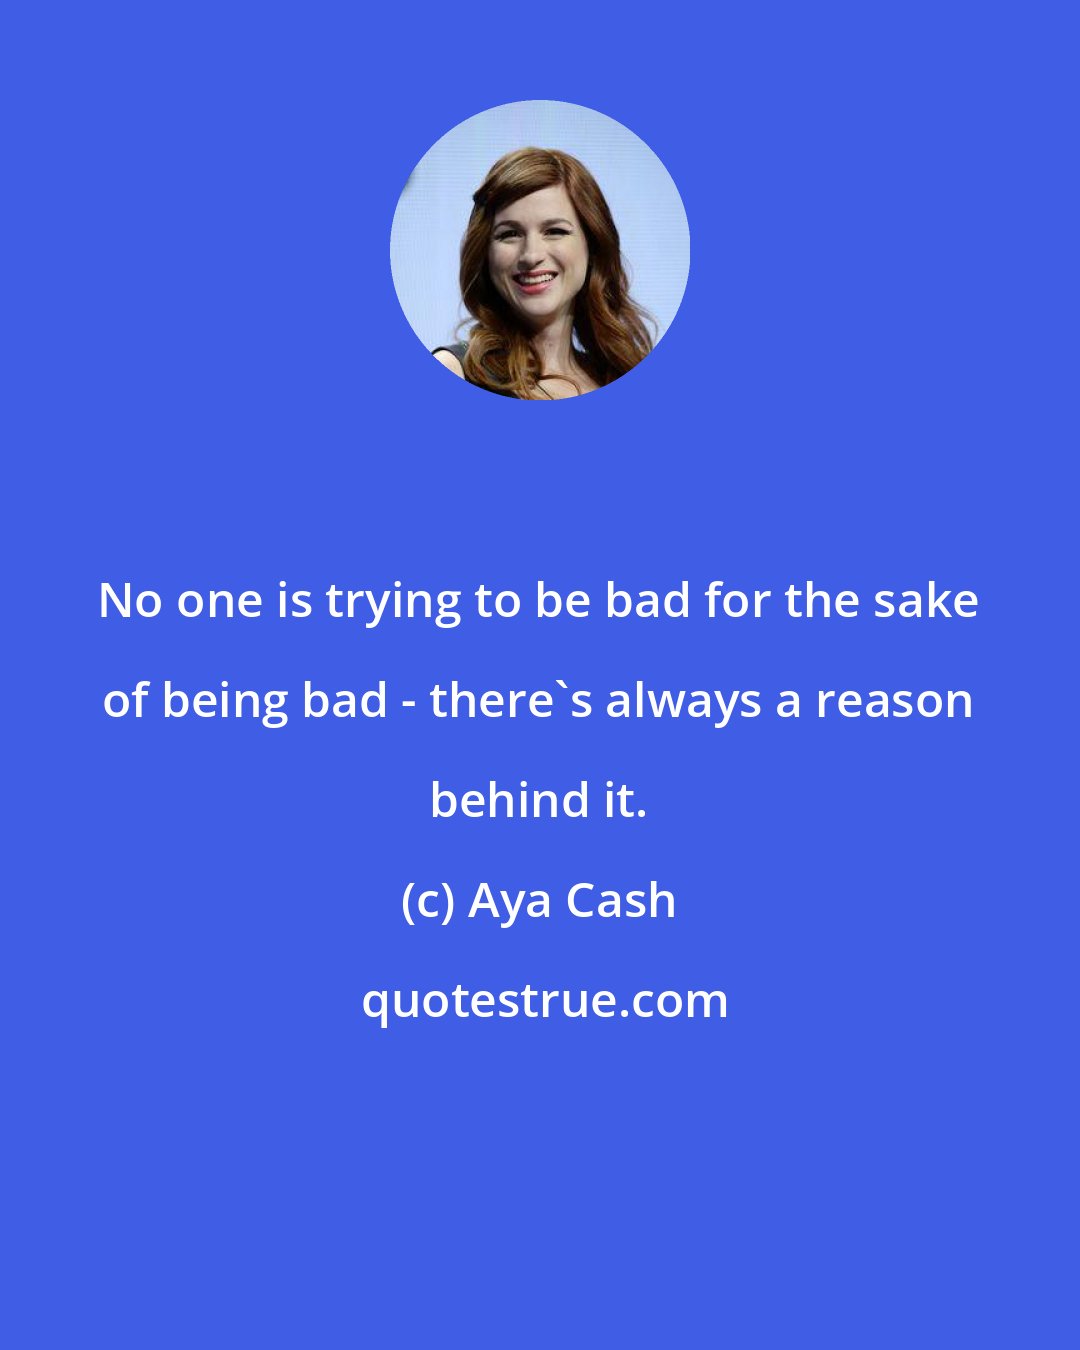 Aya Cash: No one is trying to be bad for the sake of being bad - there's always a reason behind it.